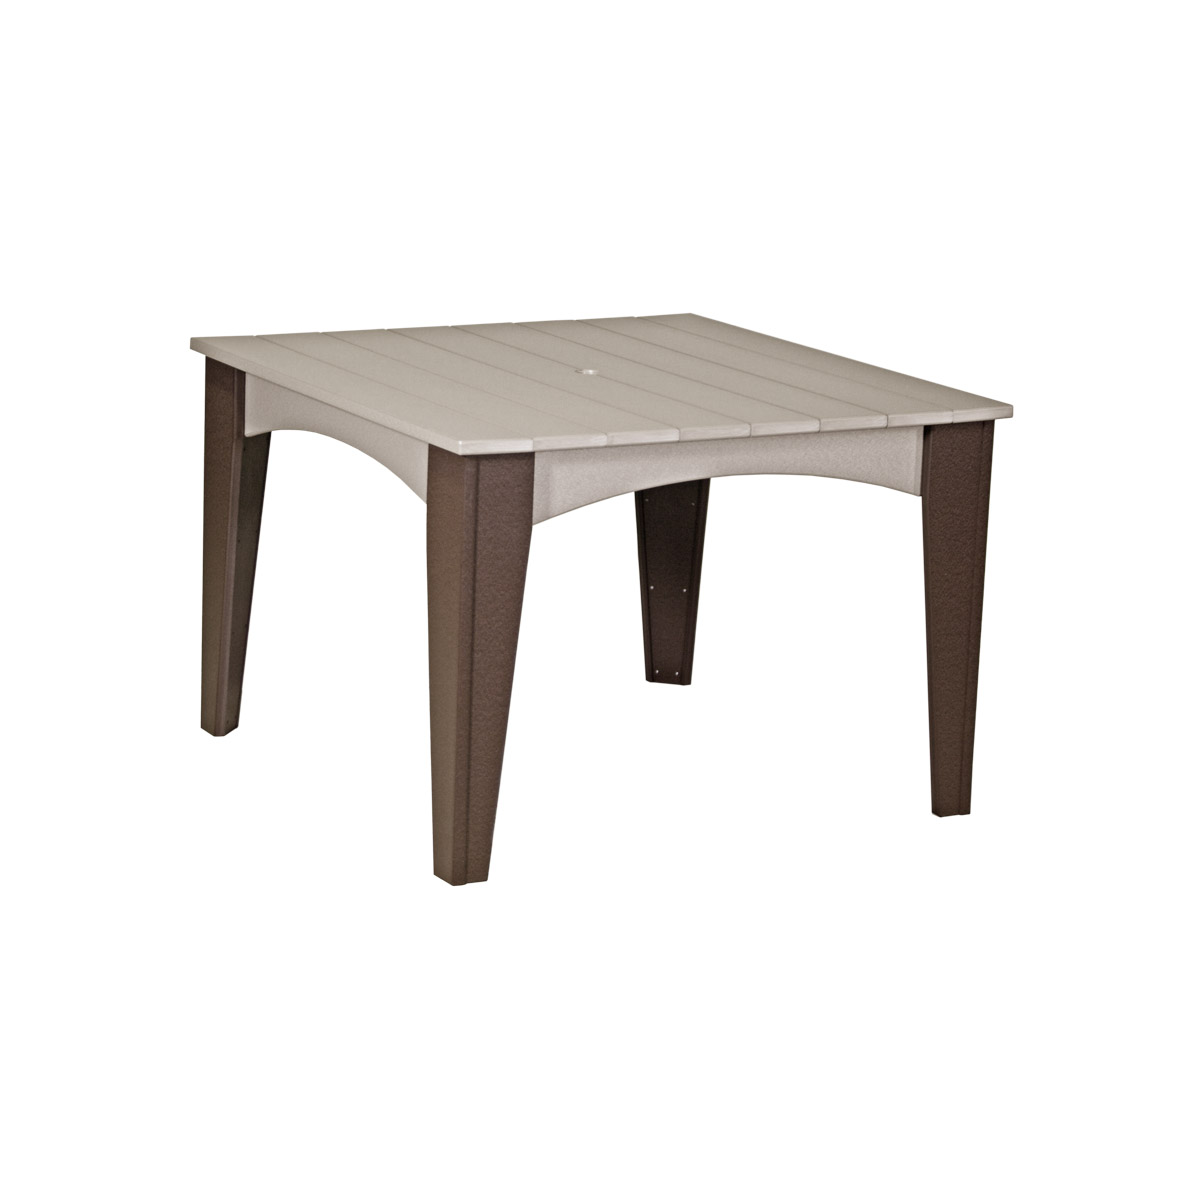 44inch square dining table